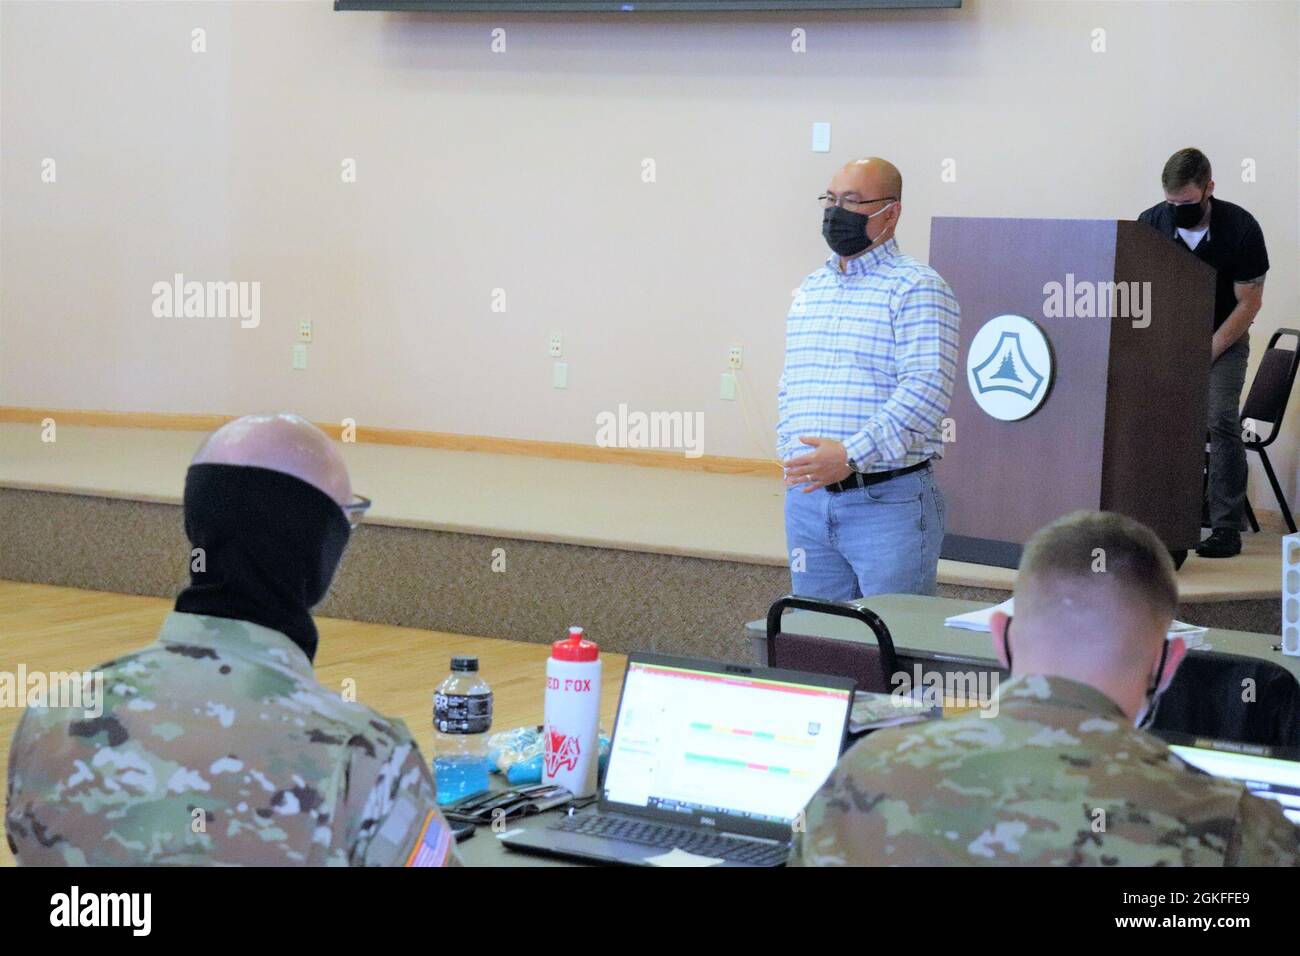 Reynaldo Vellido, range officer with the Fort McCoy Directorate of Plans, Training, Mobilization and Security (DPTMS), briefs 23 service members attending the DPTMS Training Workshop on April 8, 2021, in building 905 at Fort McCoy, Wis. This was the first workshop held by the directorate to assist unit representatives with the processes and requirements to schedule and hold training at Fort McCoy. The workshop took place April 7-8 and participants learned about range safety, range operations, range maps, and more. Stock Photo